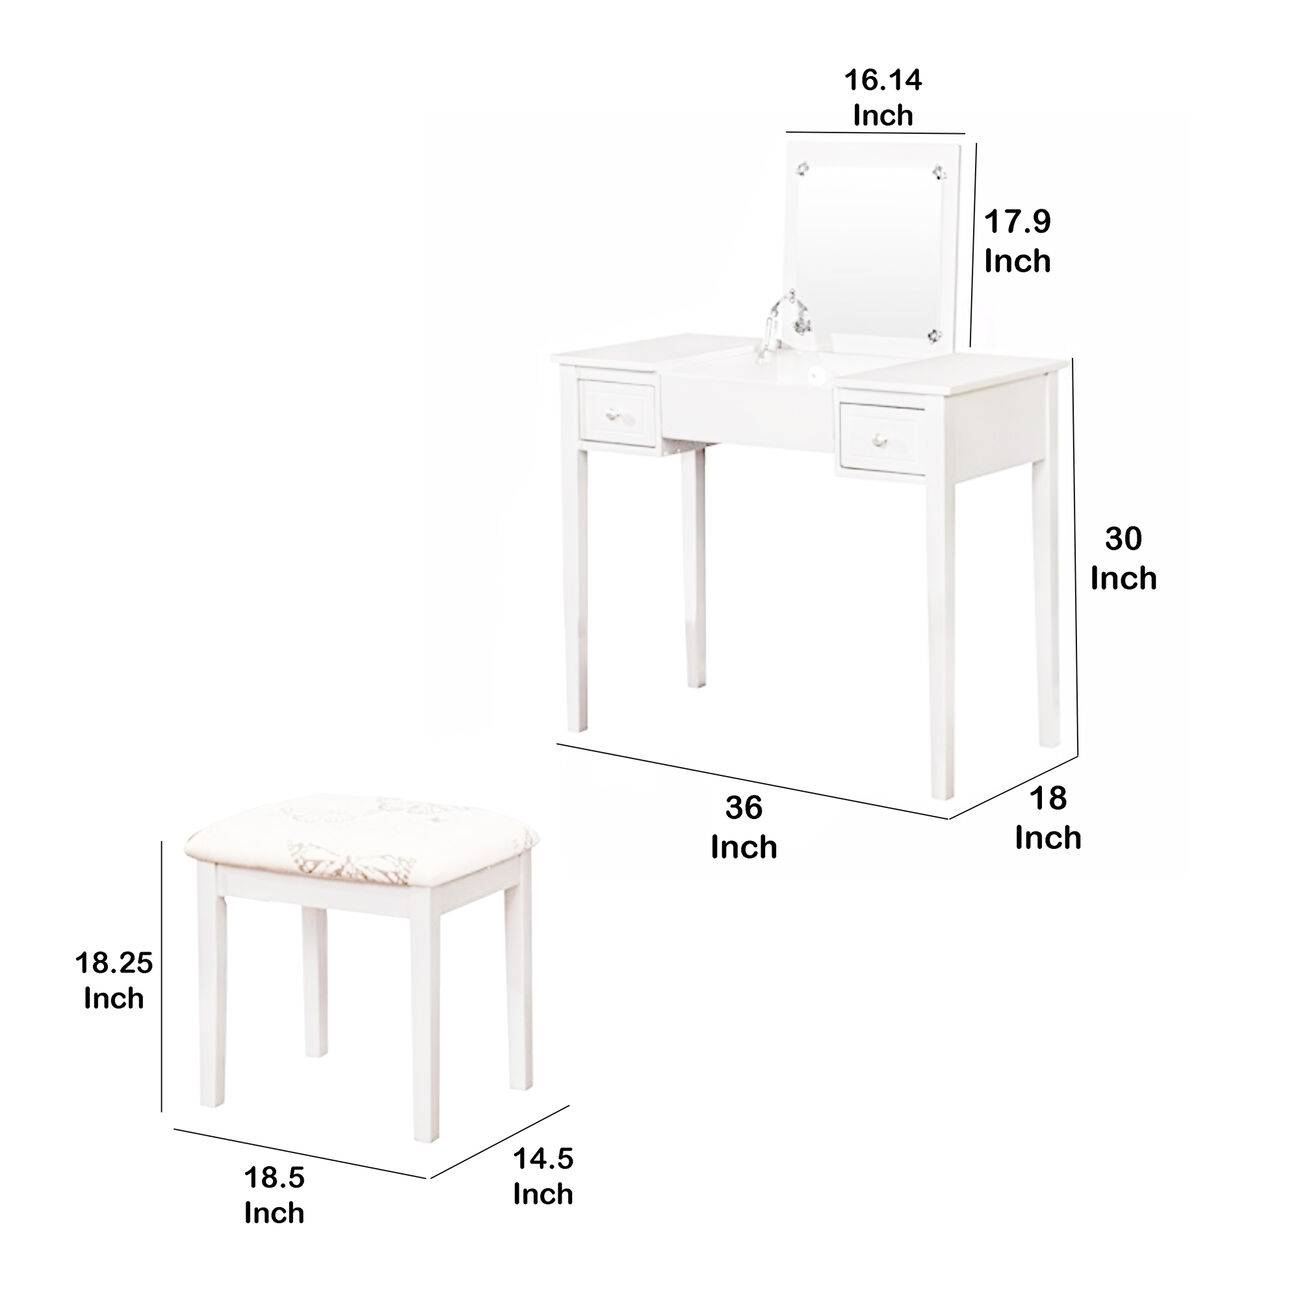 Wooden Vanity with Flip Top Mirror and Cushioned Stool,White and Beige